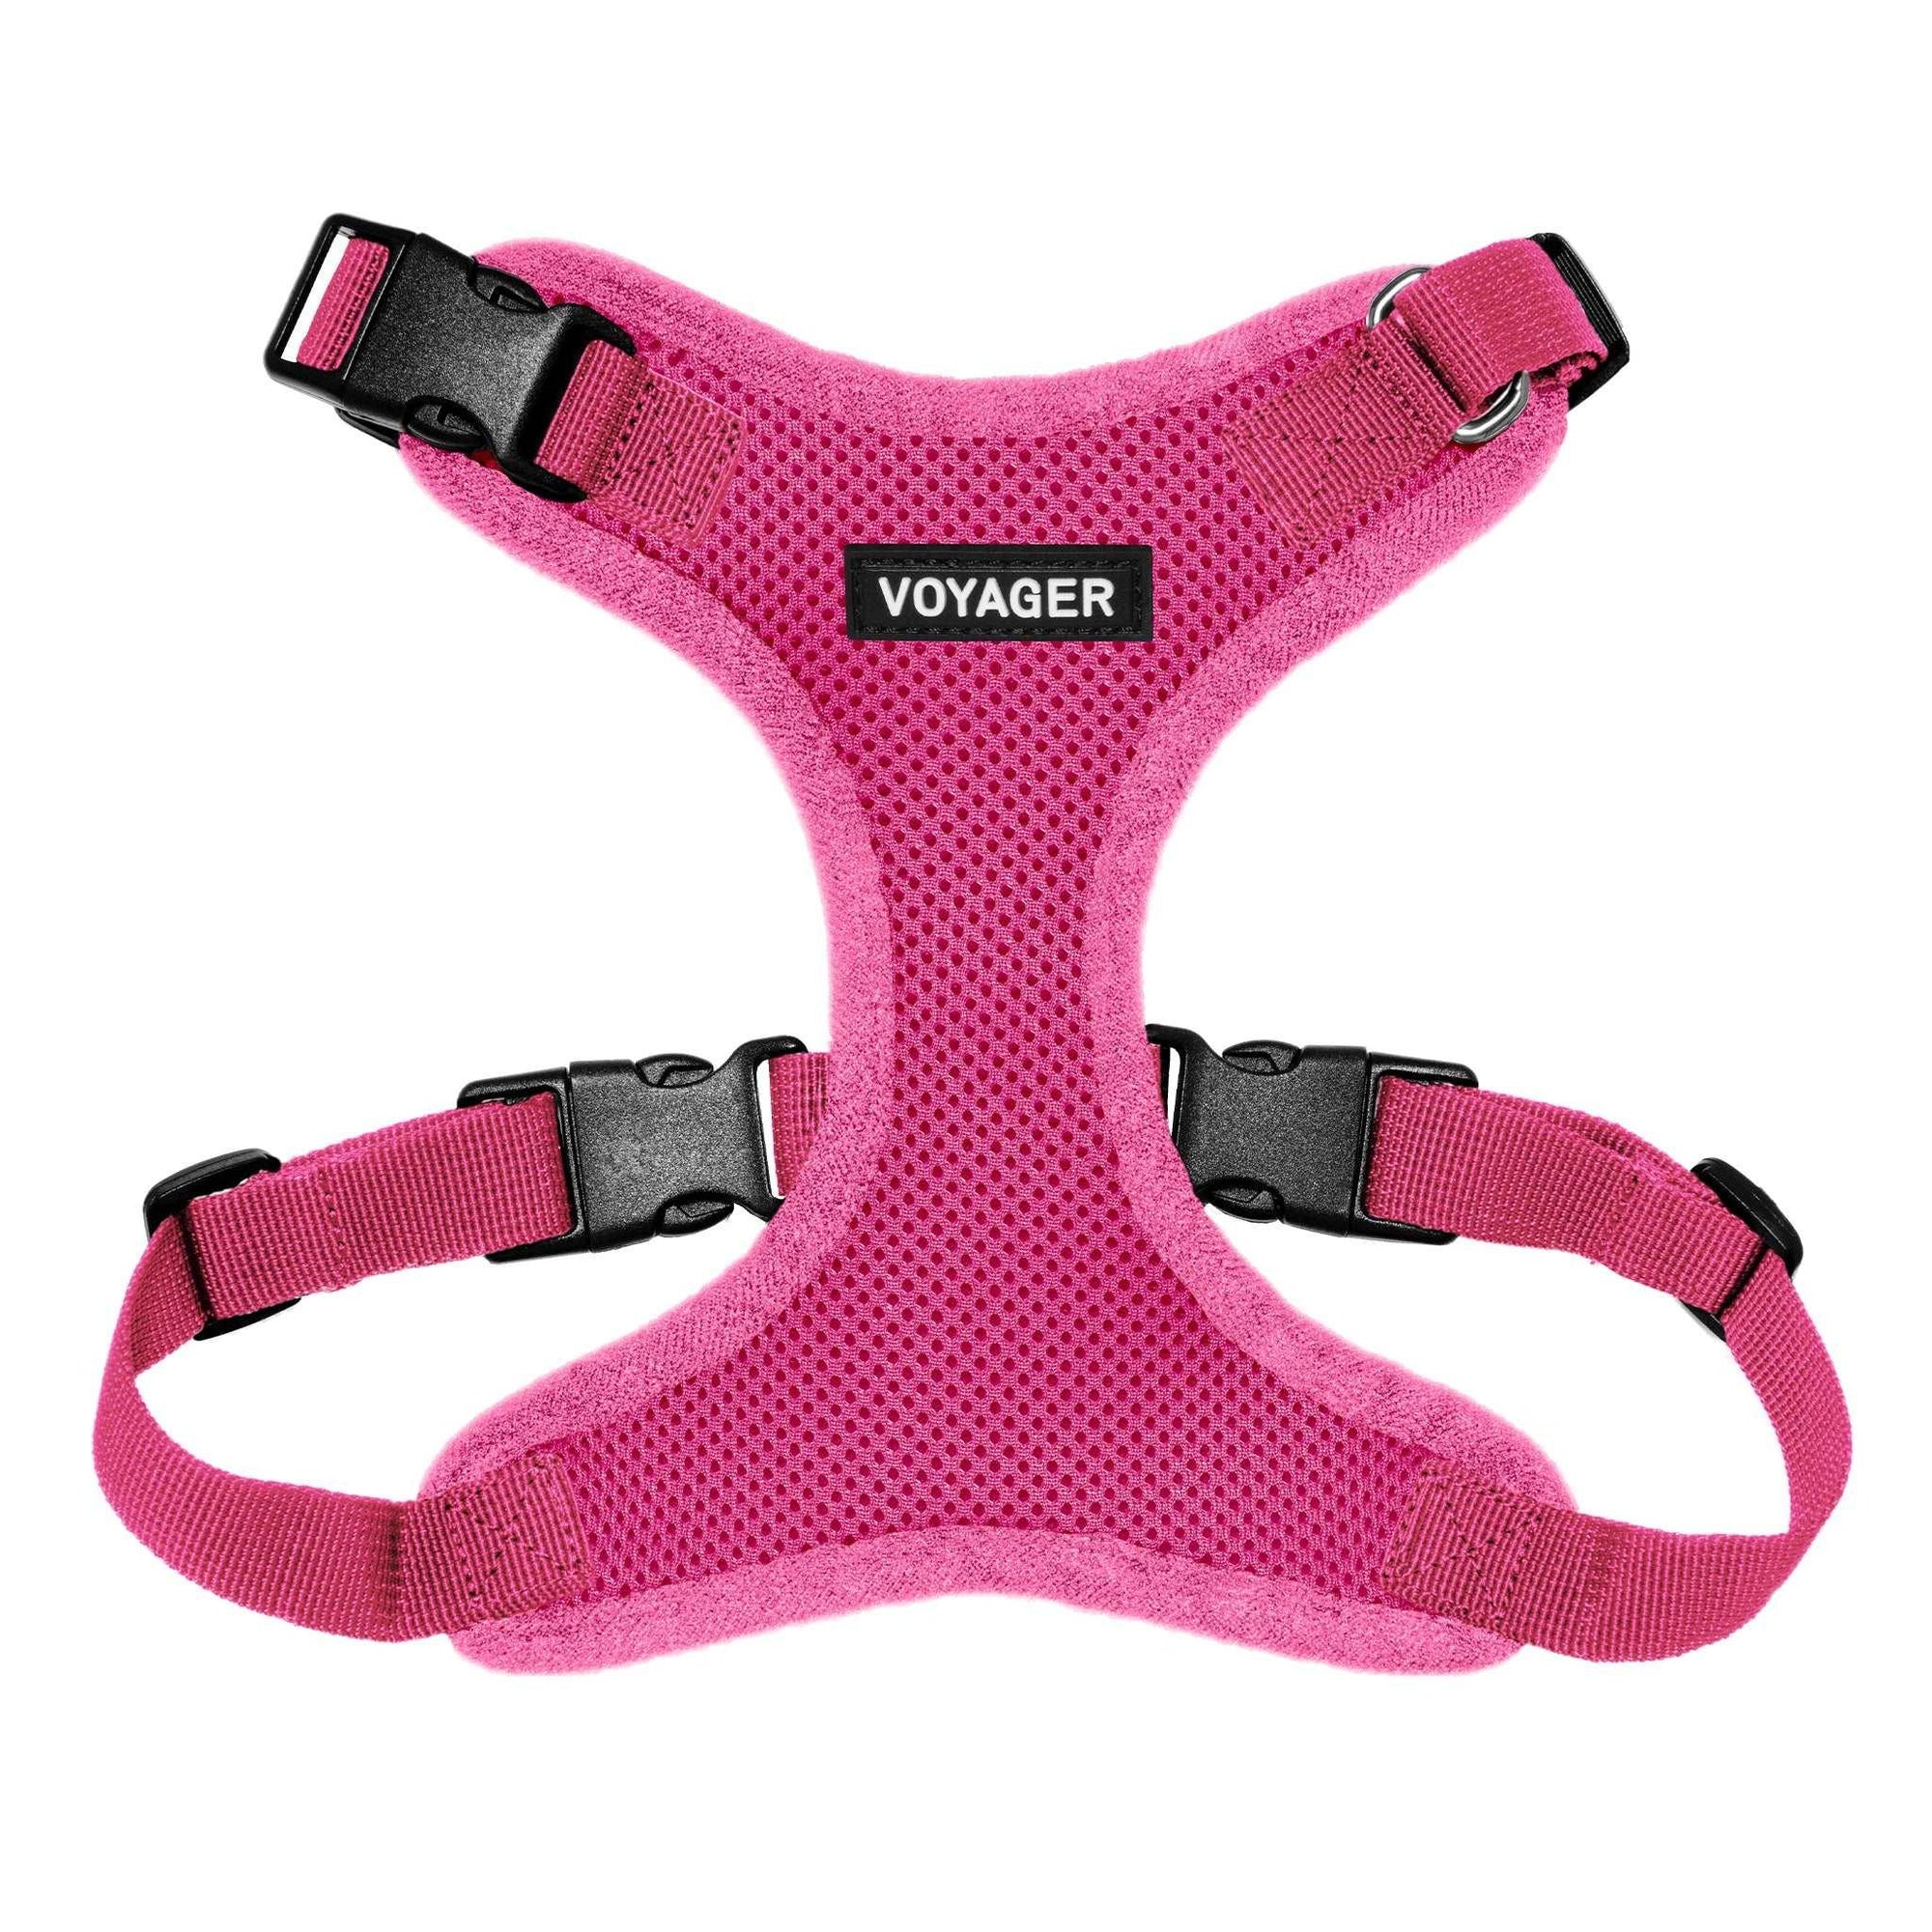 VOYAGER Step-In Lock Dog Harness in Fuchsia with Matching Trim and Webbing - Front